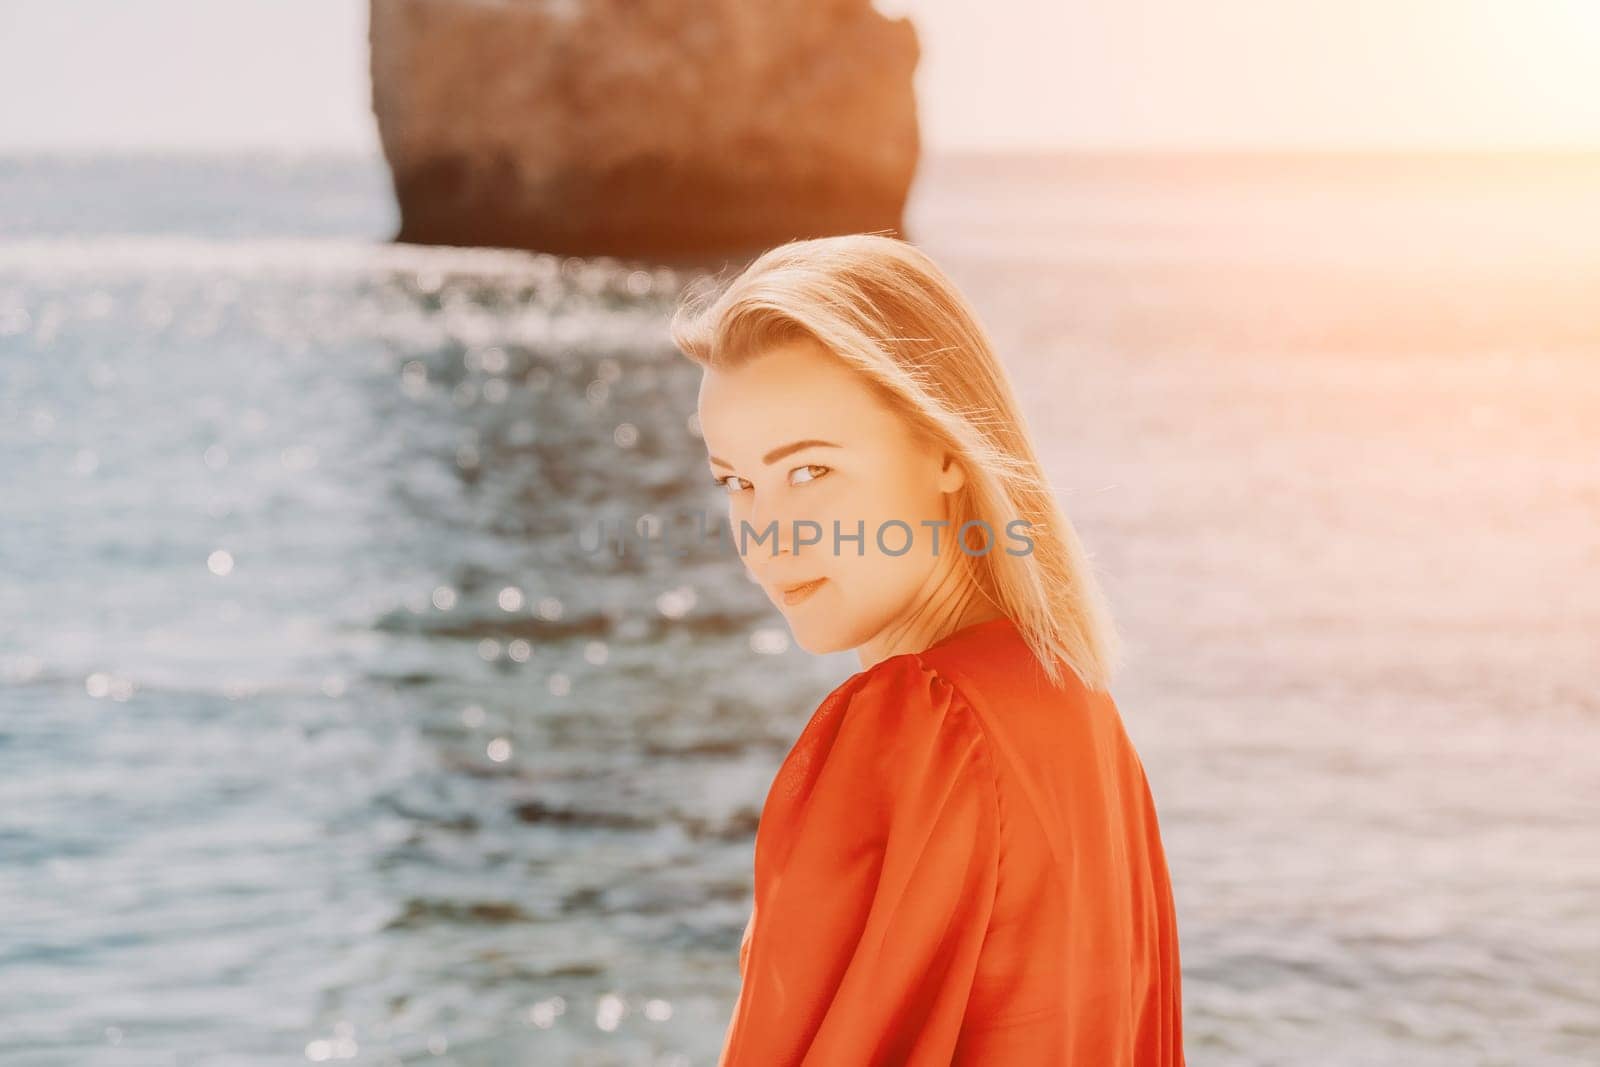 Woman summer travel sea. Happy tourist in long red dress enjoy taking picture outdoors for memories. Woman traveler posing on beach at sea surrounded by volcanic mountains, sharing travel adventure by panophotograph